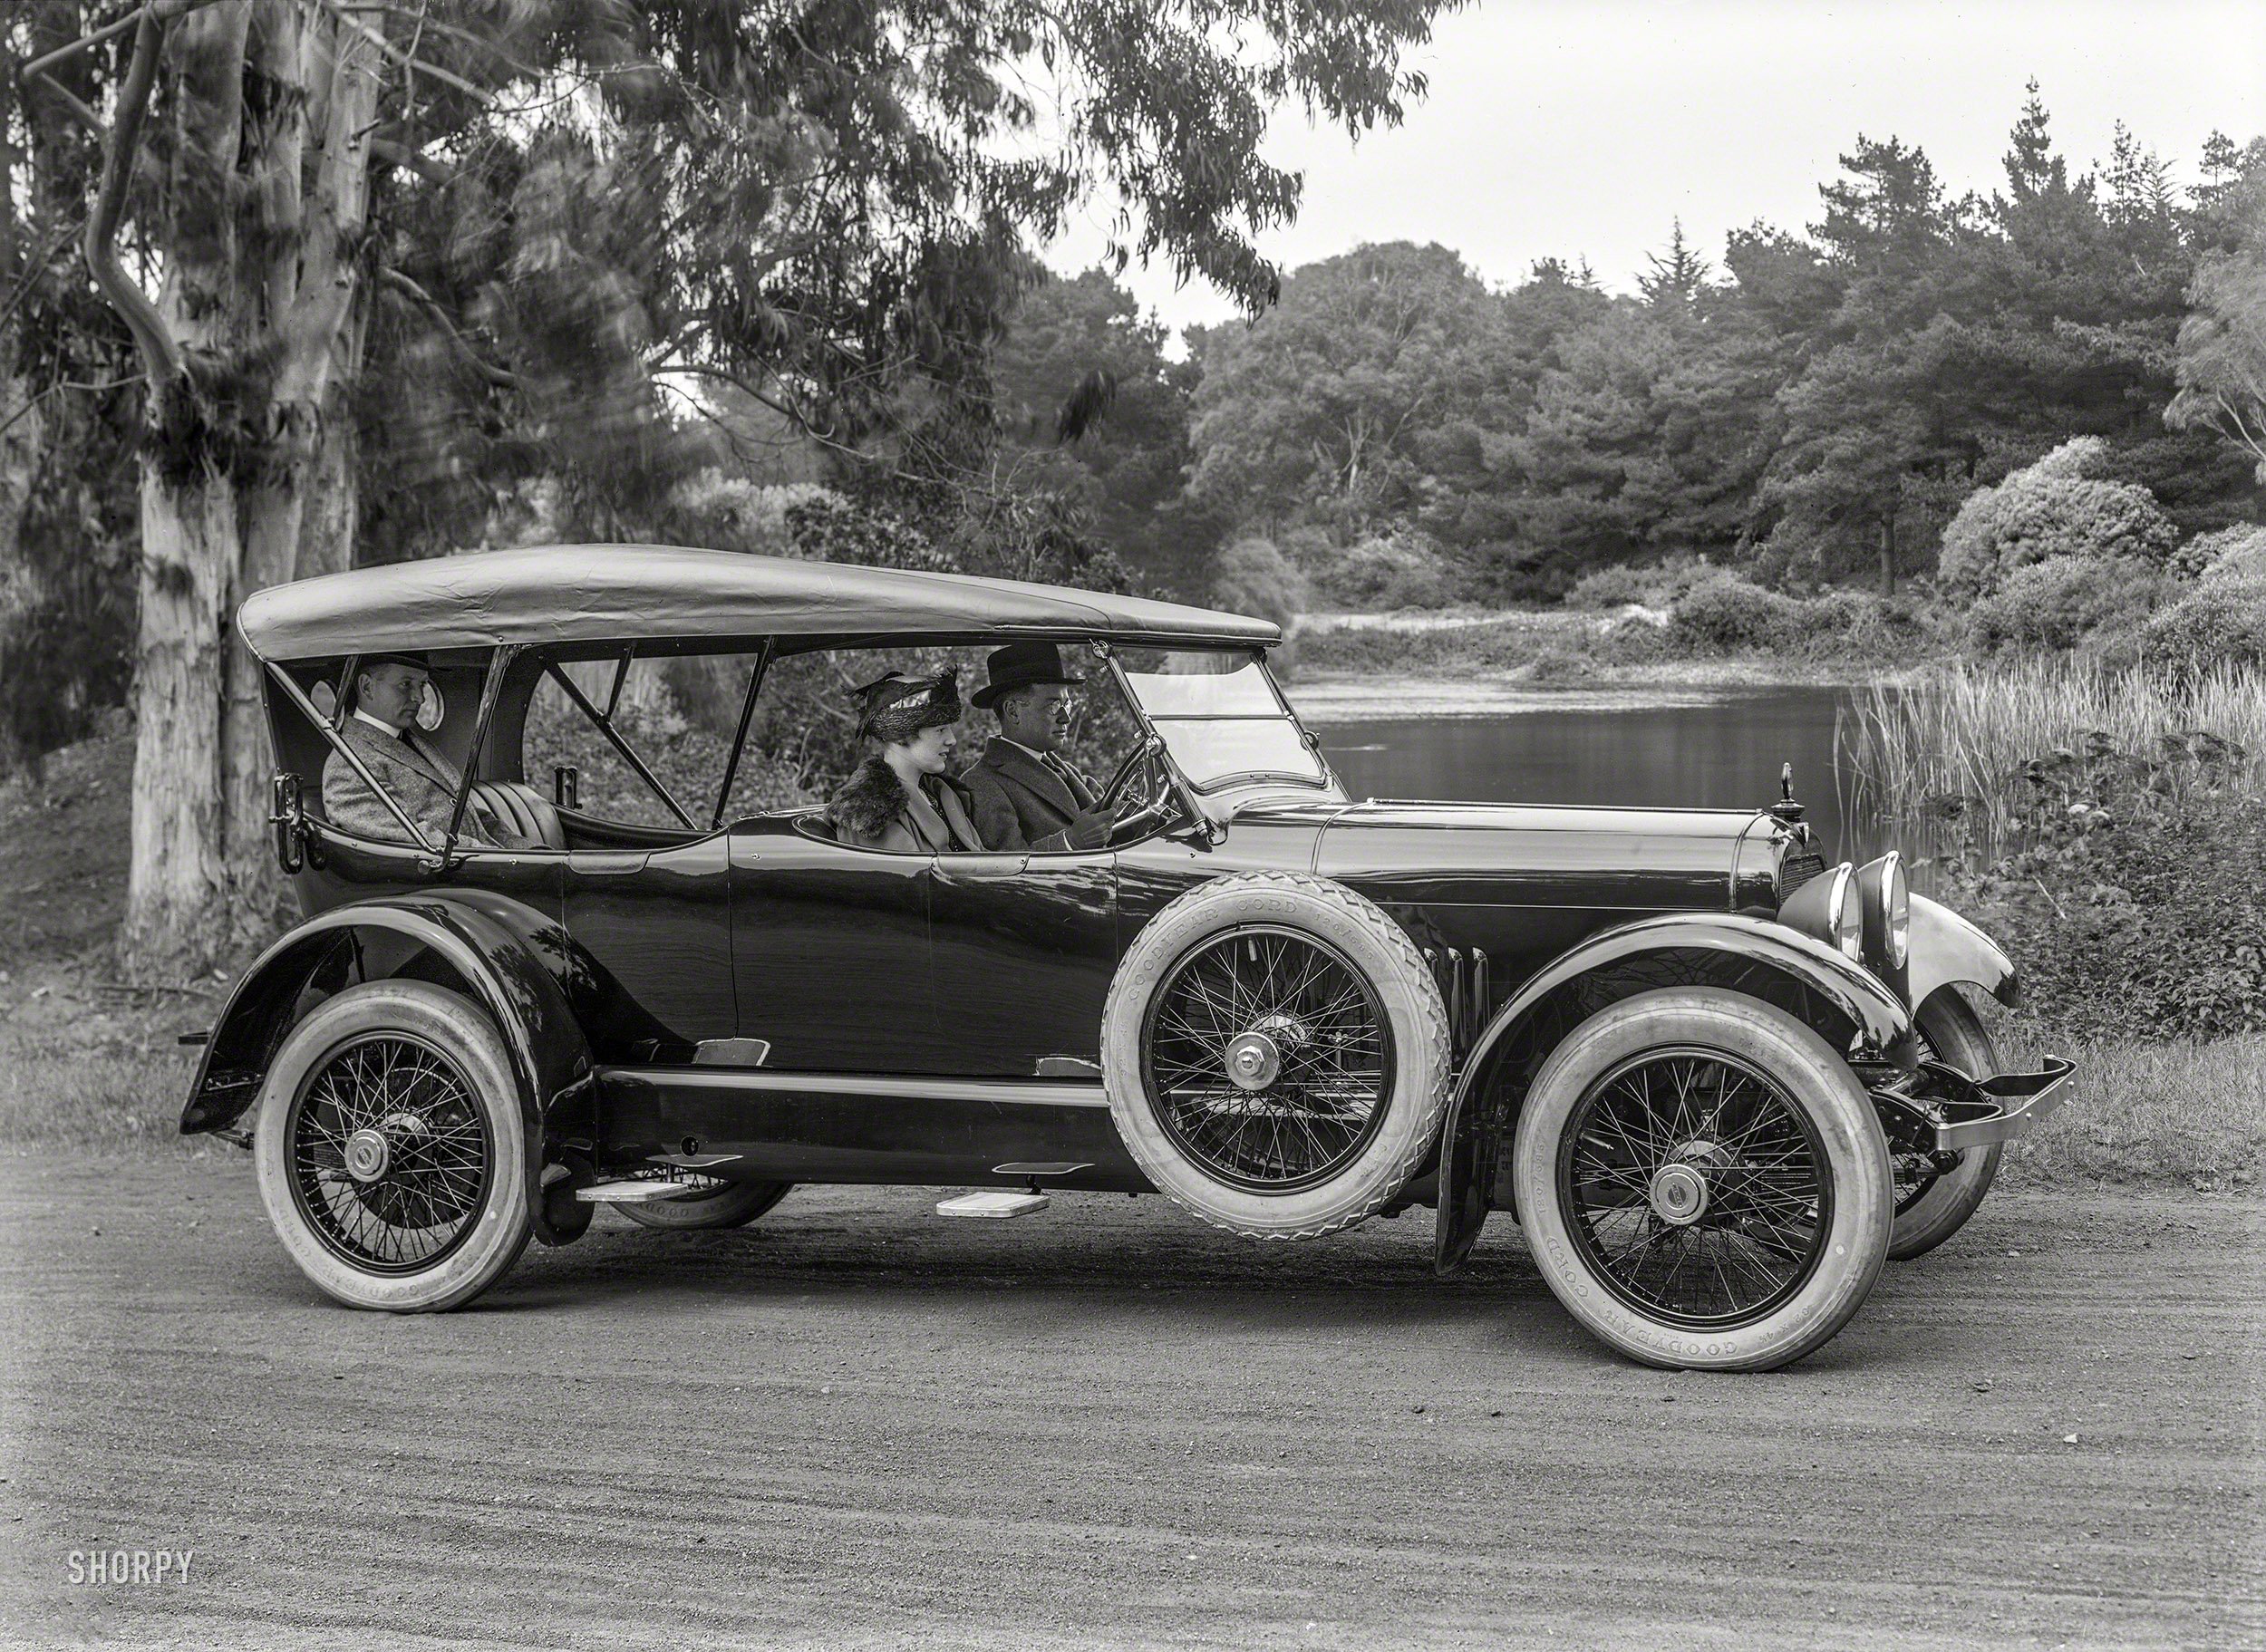 &nbsp; &nbsp; &nbsp; &nbsp; "We always carry a spare, just in case."
San Francisco circa 1919. "Mercer touring car at Chain of Lakes, Golden Gate Park." 5x7 glass negative by Christopher Helin. View full size.